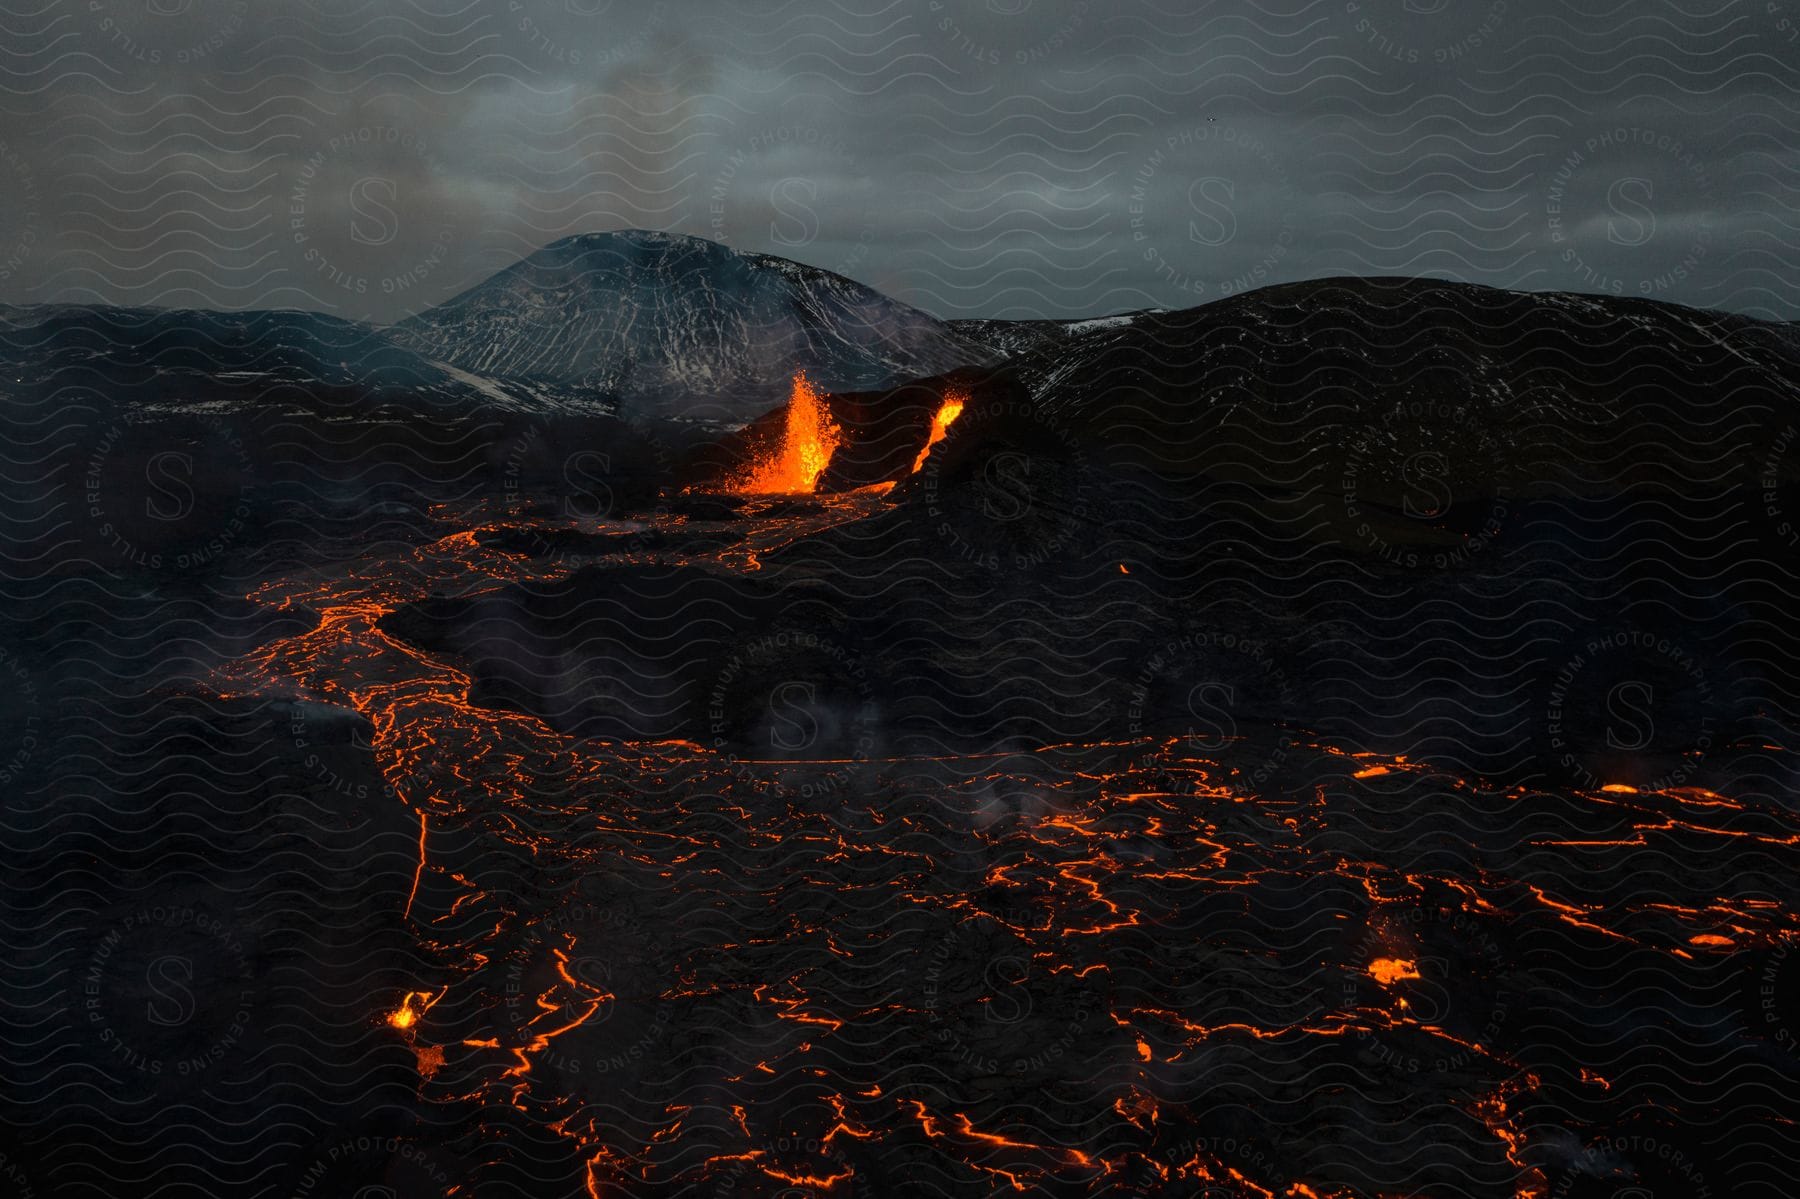 Lava bursts and flows from a volcano creating a fiery river under a cloudy night sky